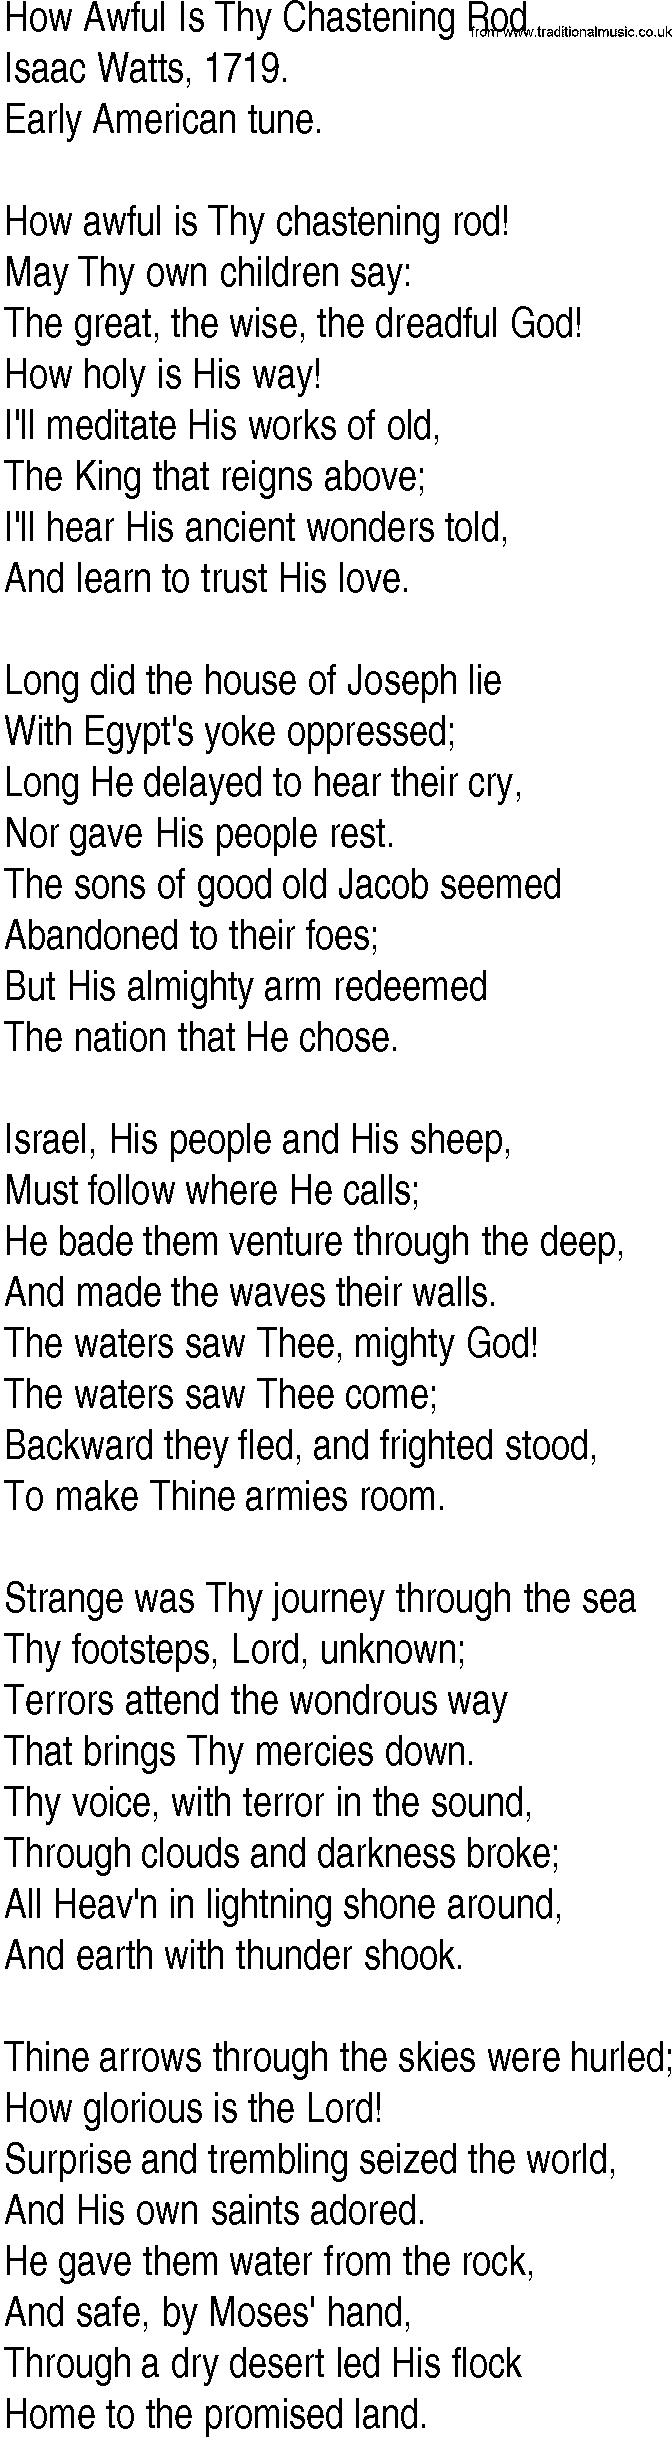 Hymn and Gospel Song: How Awful Is Thy Chastening Rod by Isaac Watts lyrics